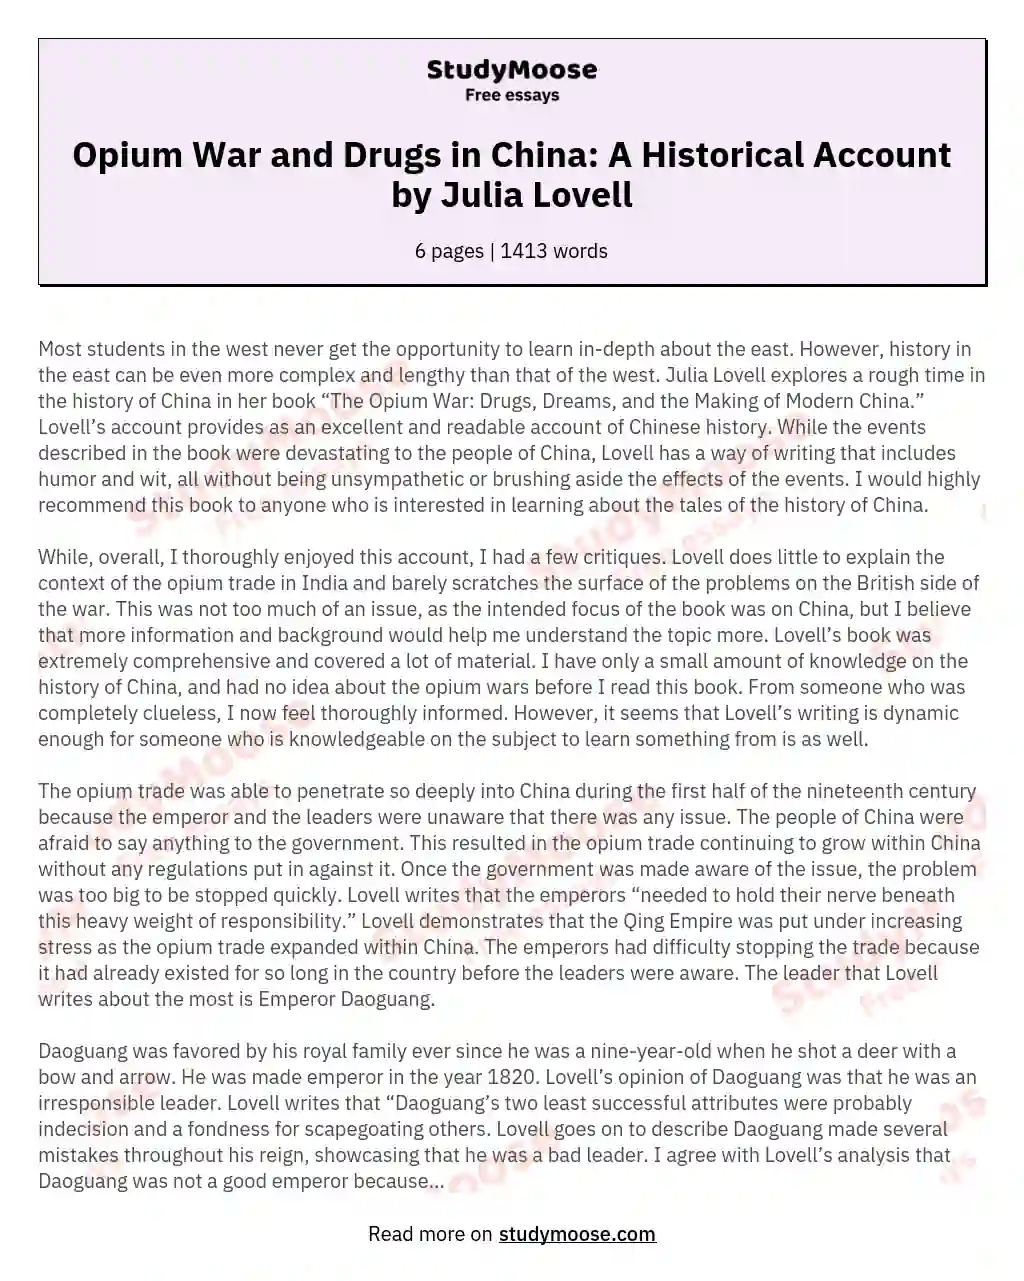 Opium War and Drugs in China: A Historical Account by Julia Lovell essay